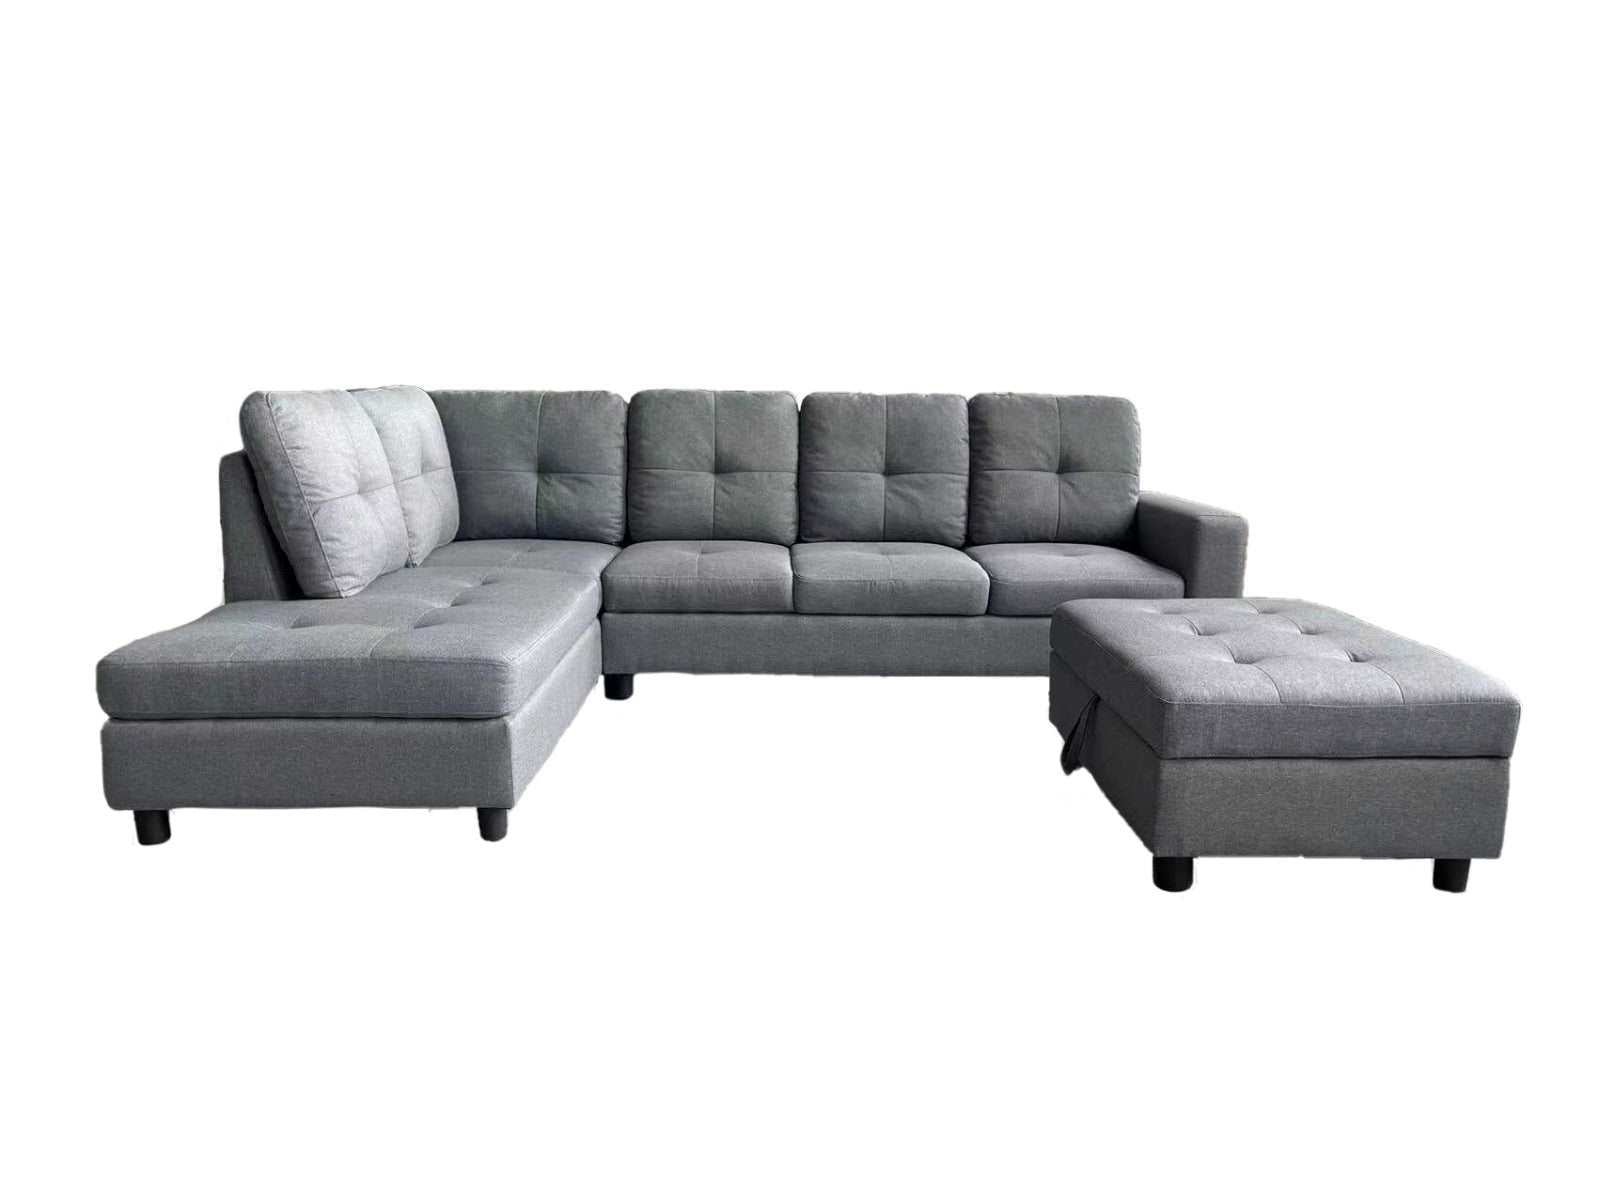 Linen Fabric Sectional Sofa With Storage Ottoman 2208